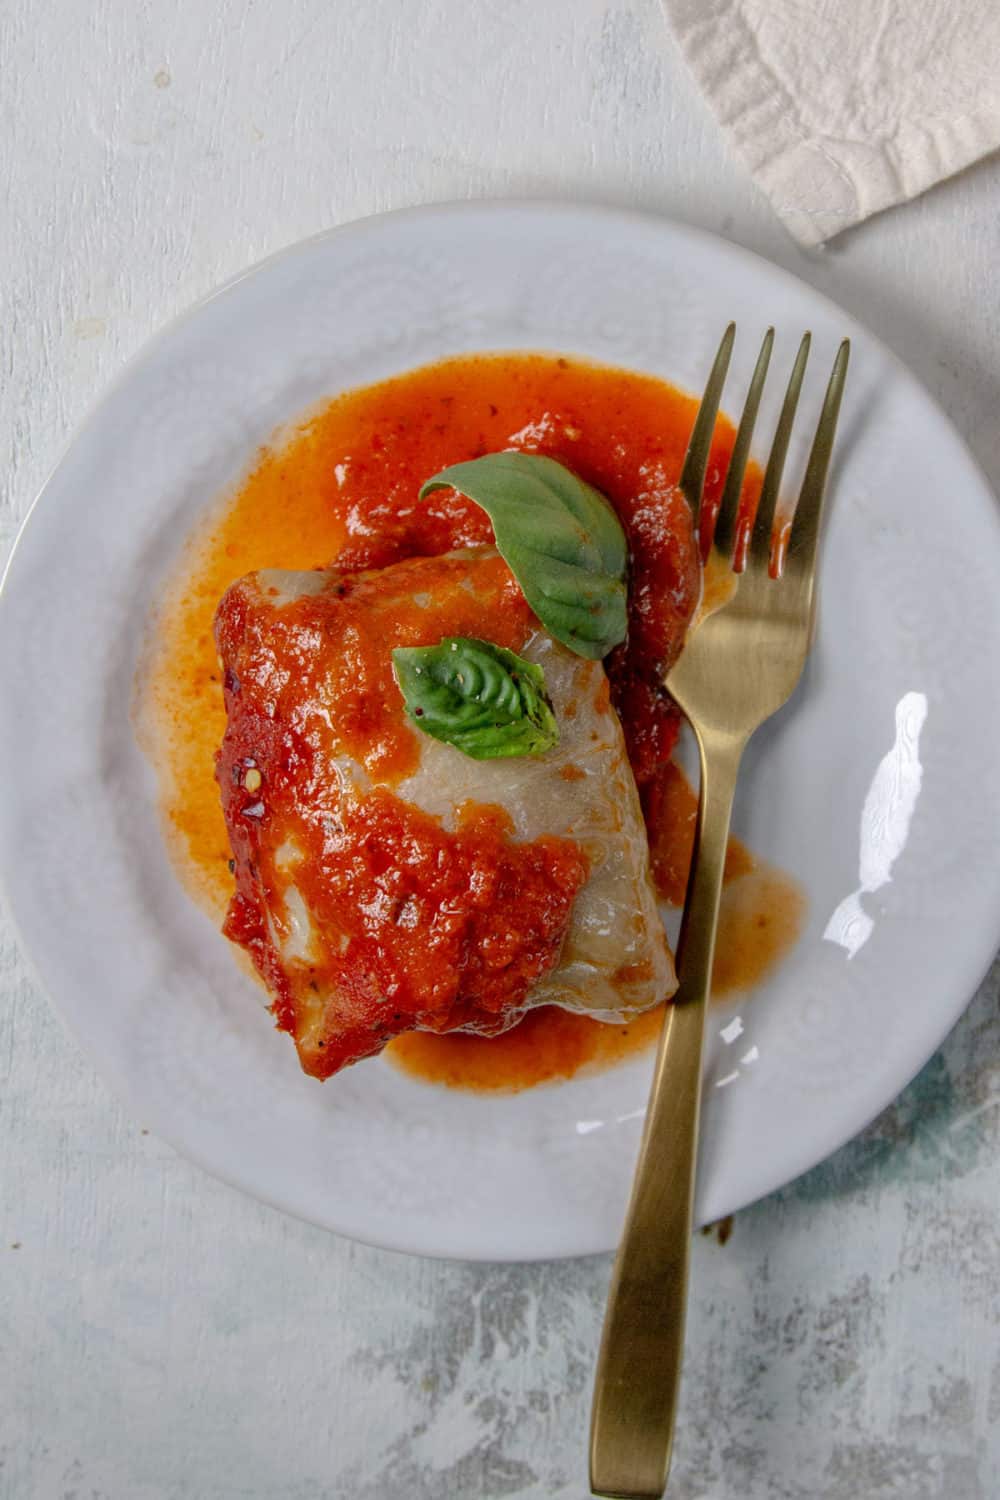 A plated cabbage roll.